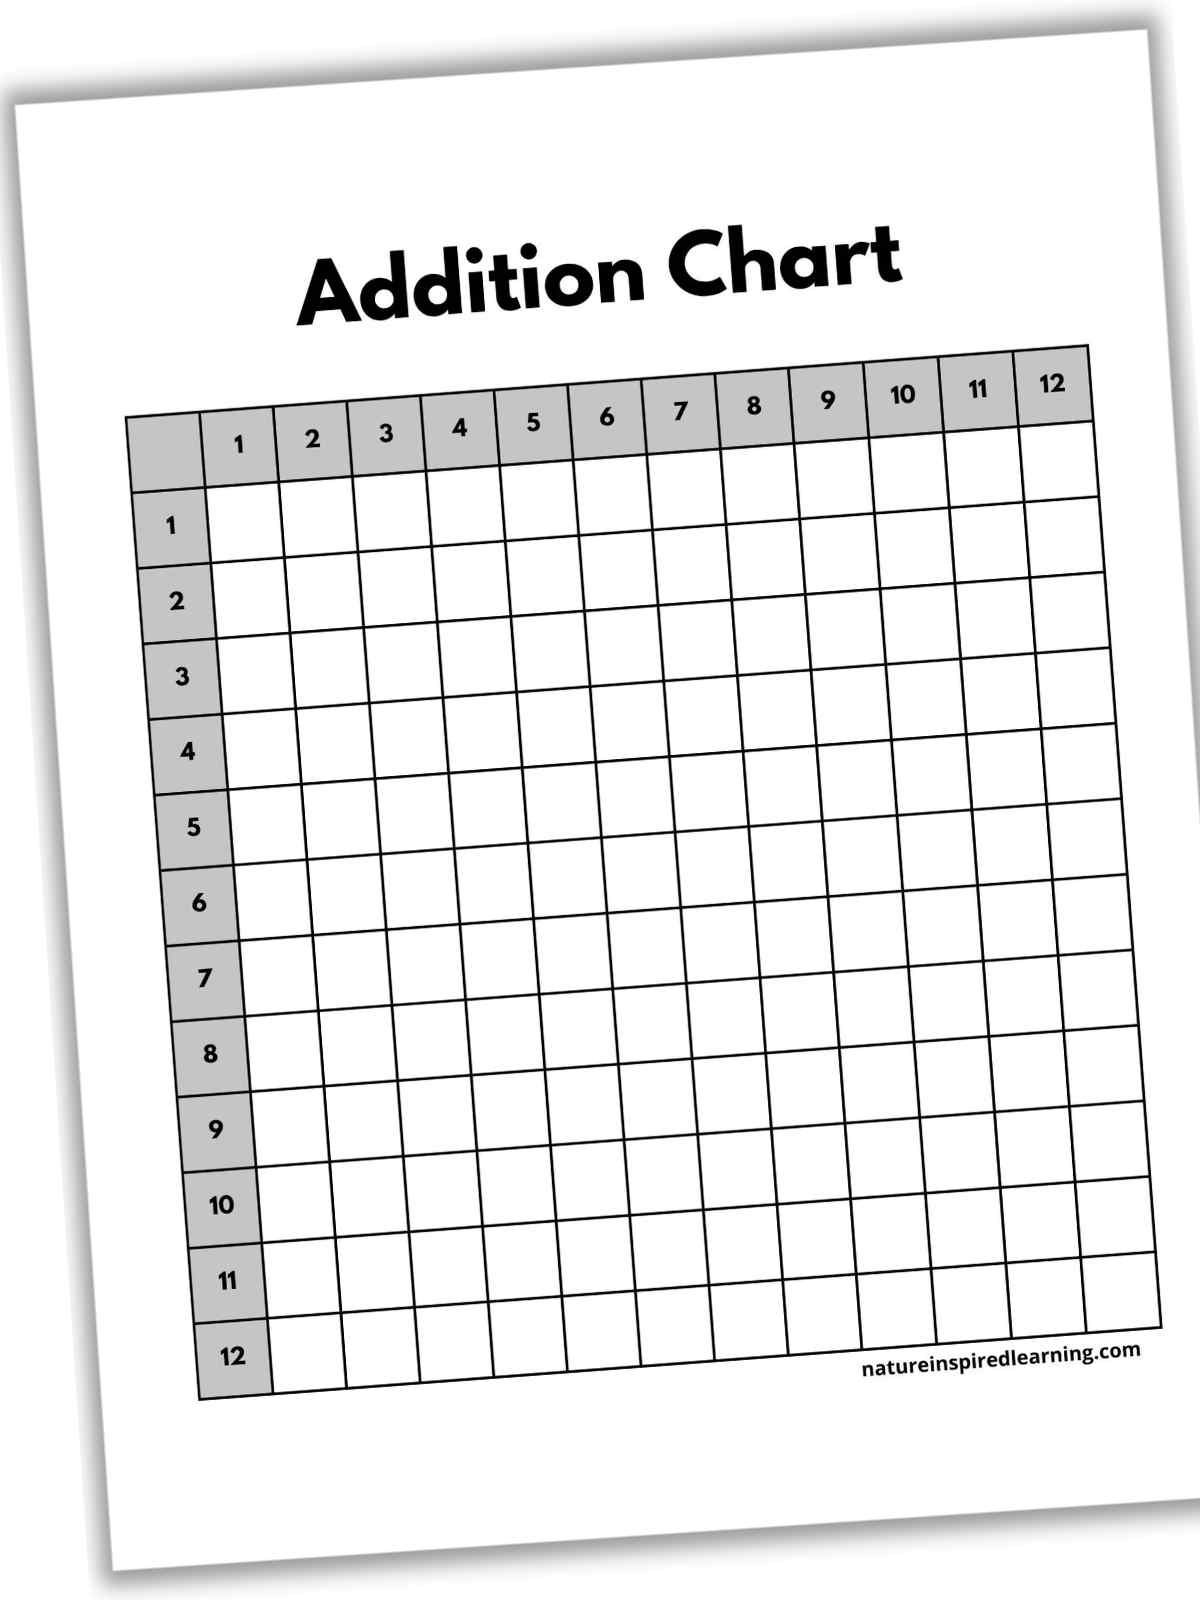 Addition Charts Nature Inspired Learning - Free Printable Addition Chart